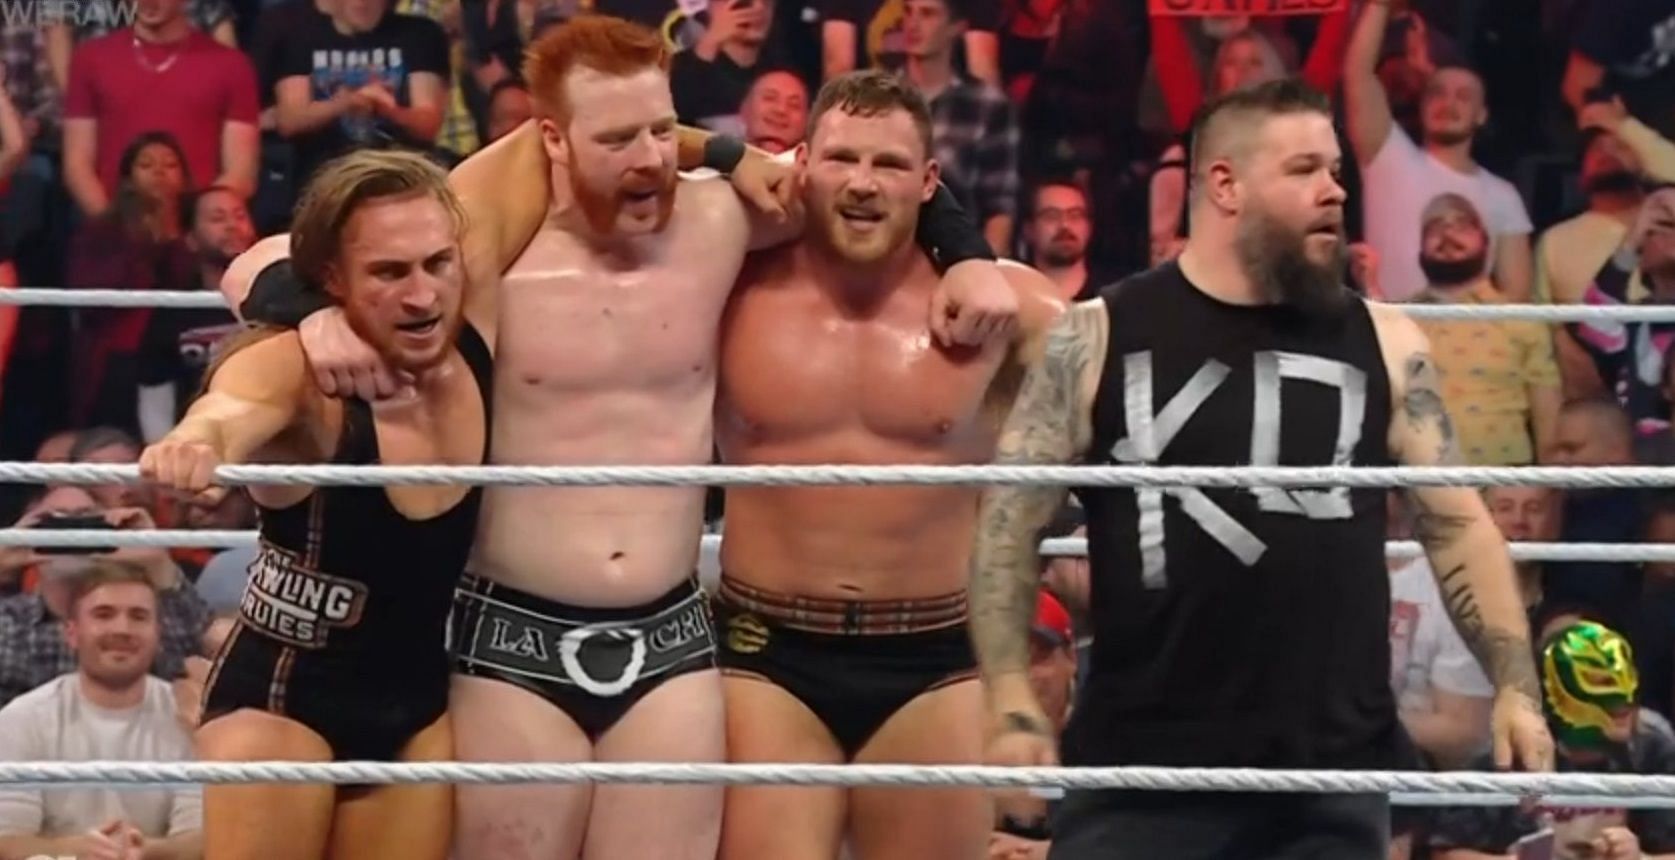 The Brawling Brutes emerged victorious on RAW